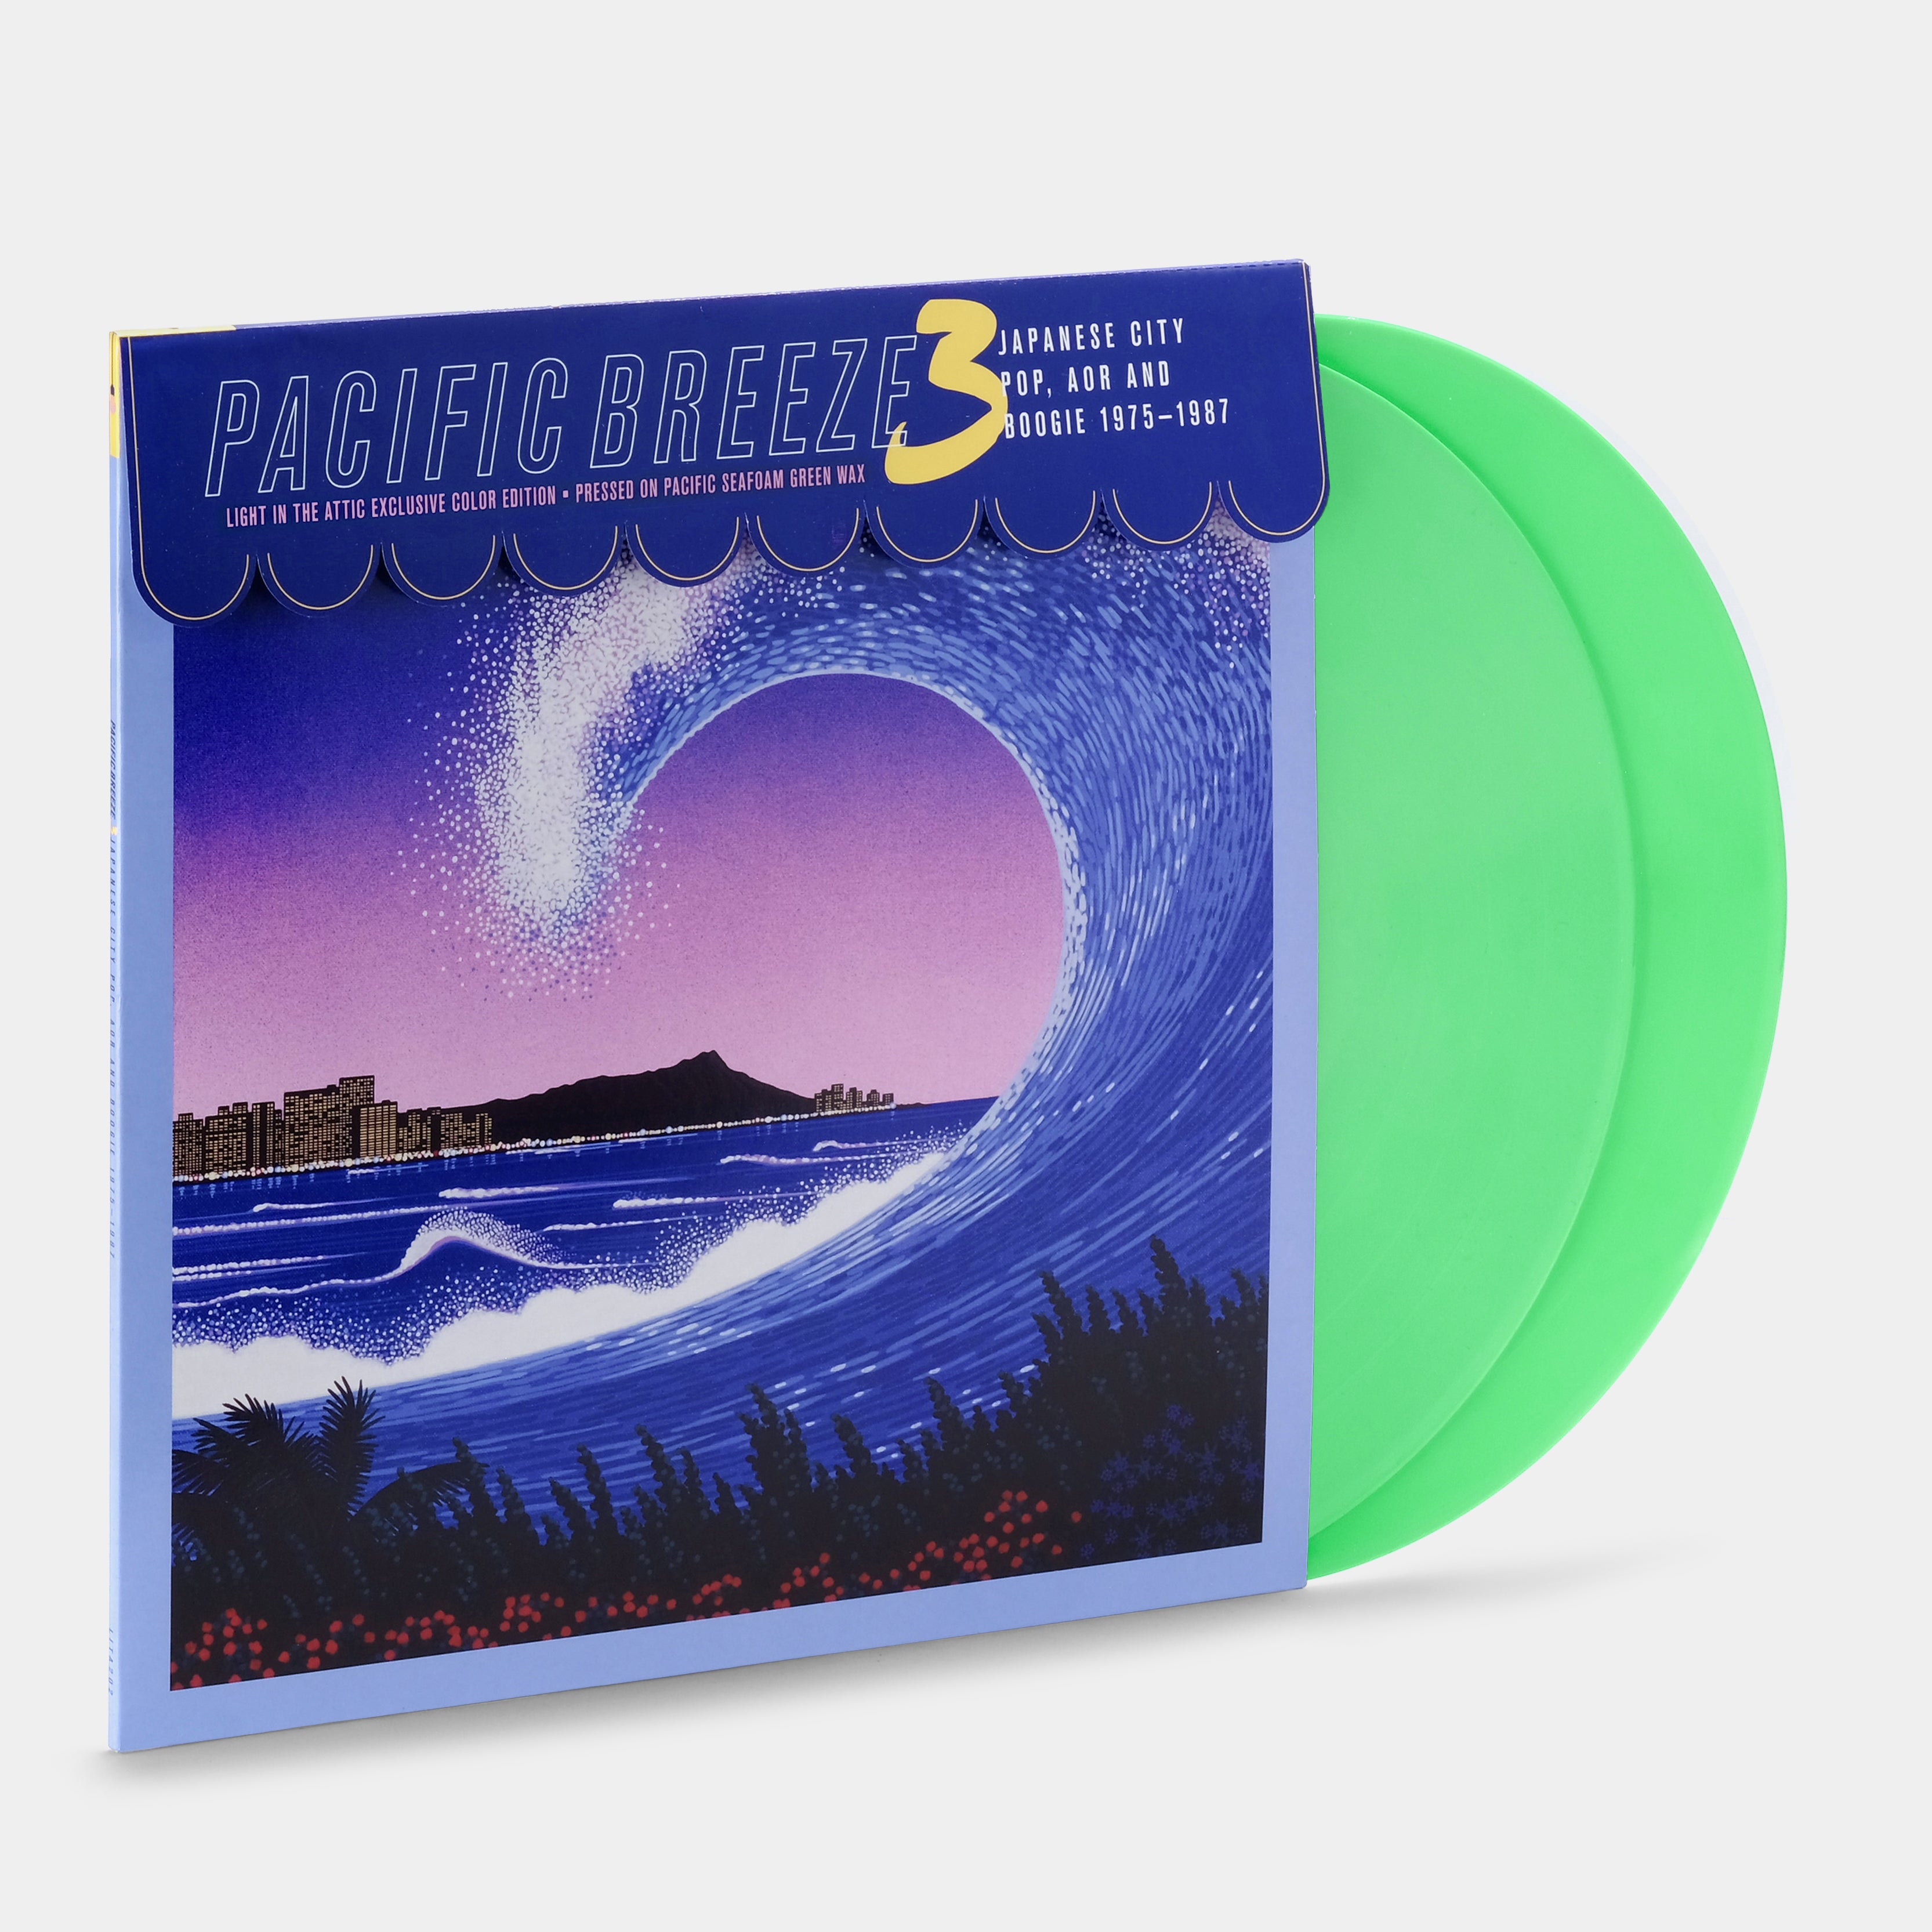 Pacific Breeze 3: Japanese City Pop, AOR And Boogie 1975-1987 2xLP Pacific Seafoam Green Vinyl Record